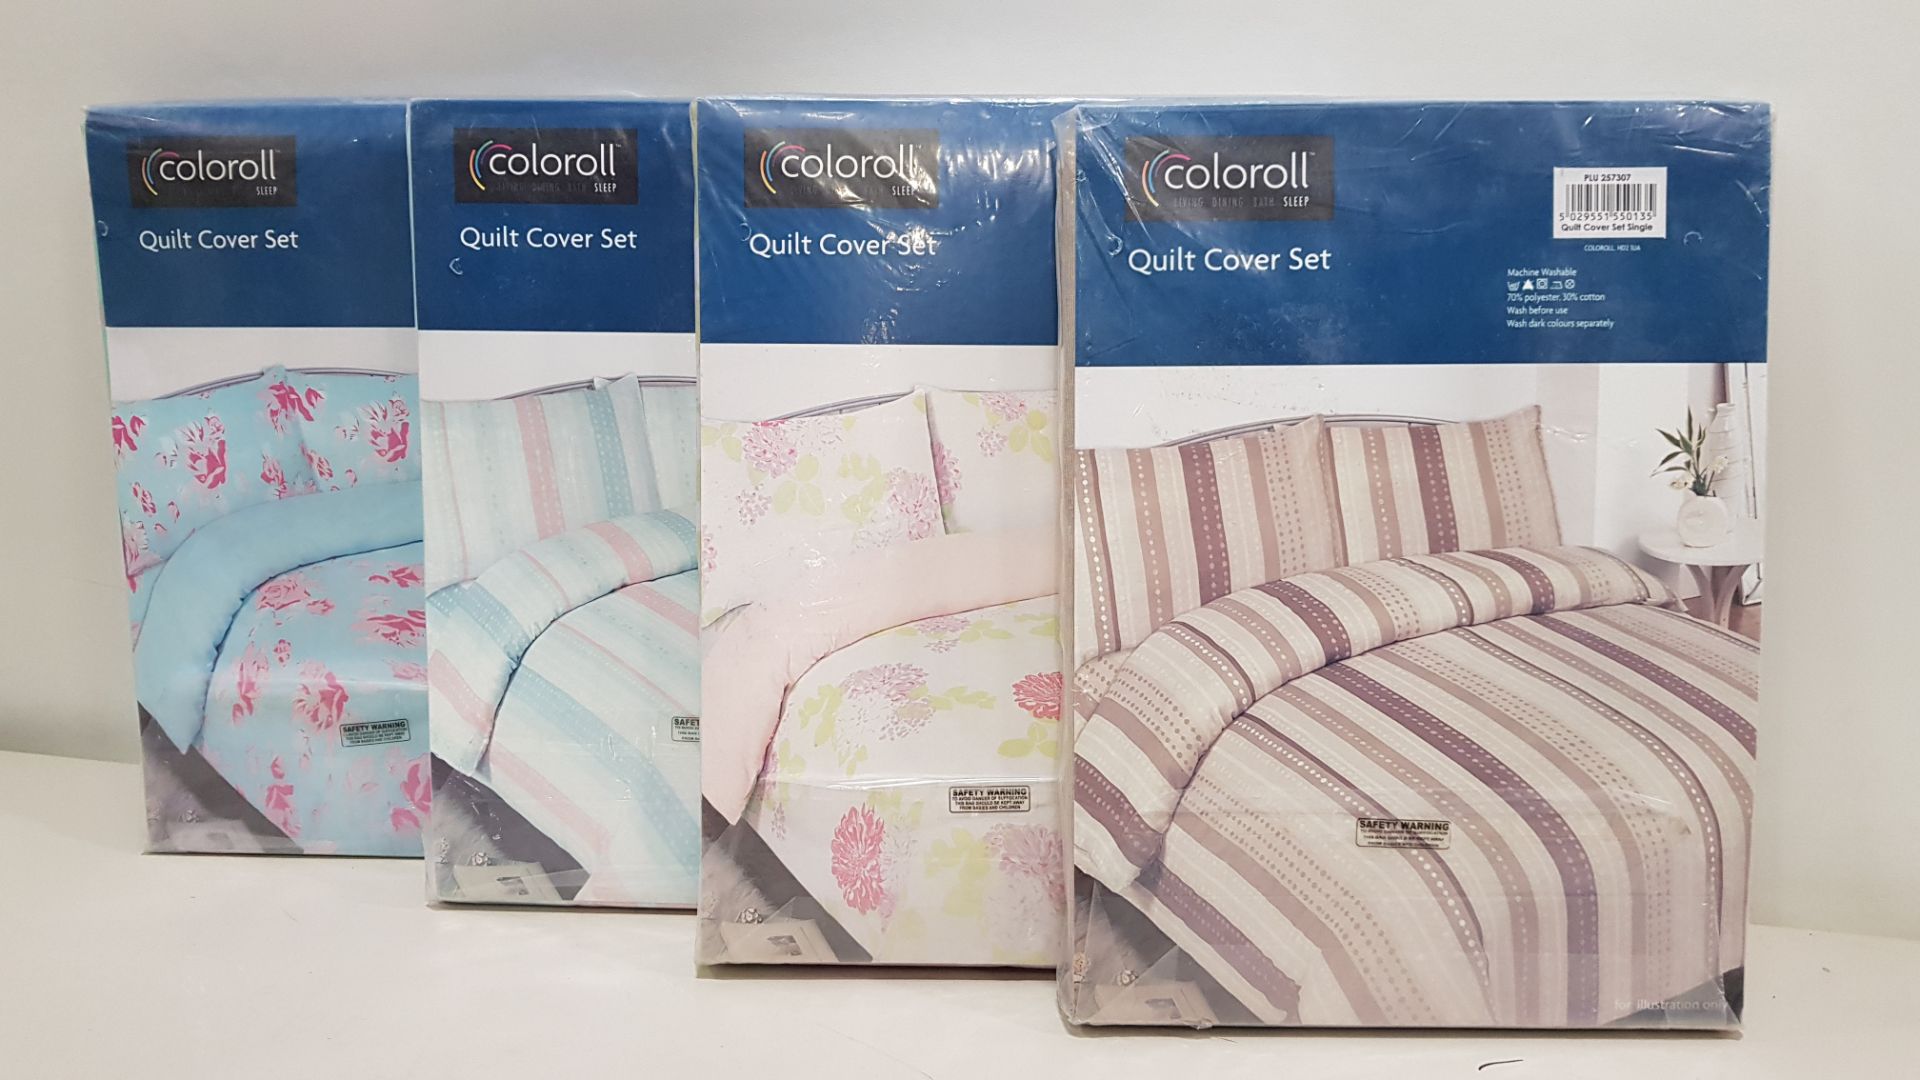 25 X ESSENTIAL COLOROLL SINGLE DUVET SETS IN VARIOUS STYLES IE BLUE WITH PINK FLOWER PRINT, WHITE